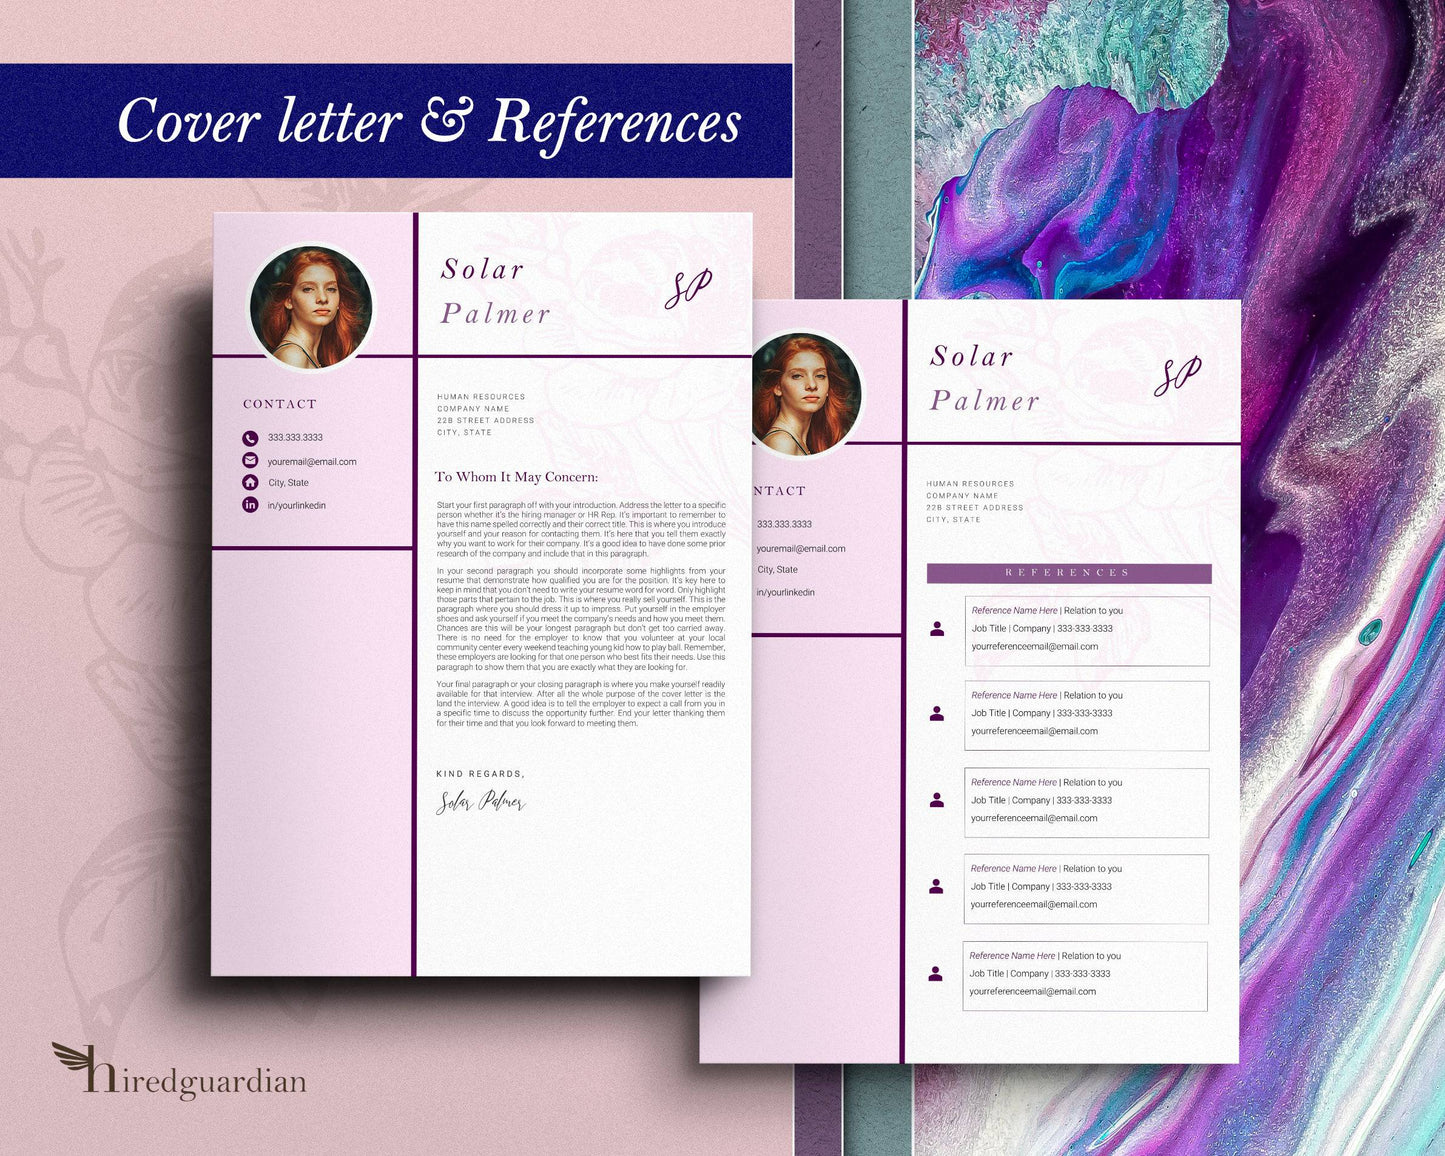 Pink Resume Template with Photo for Apple Pages in Mac or Word - Solar - Hired Guardian